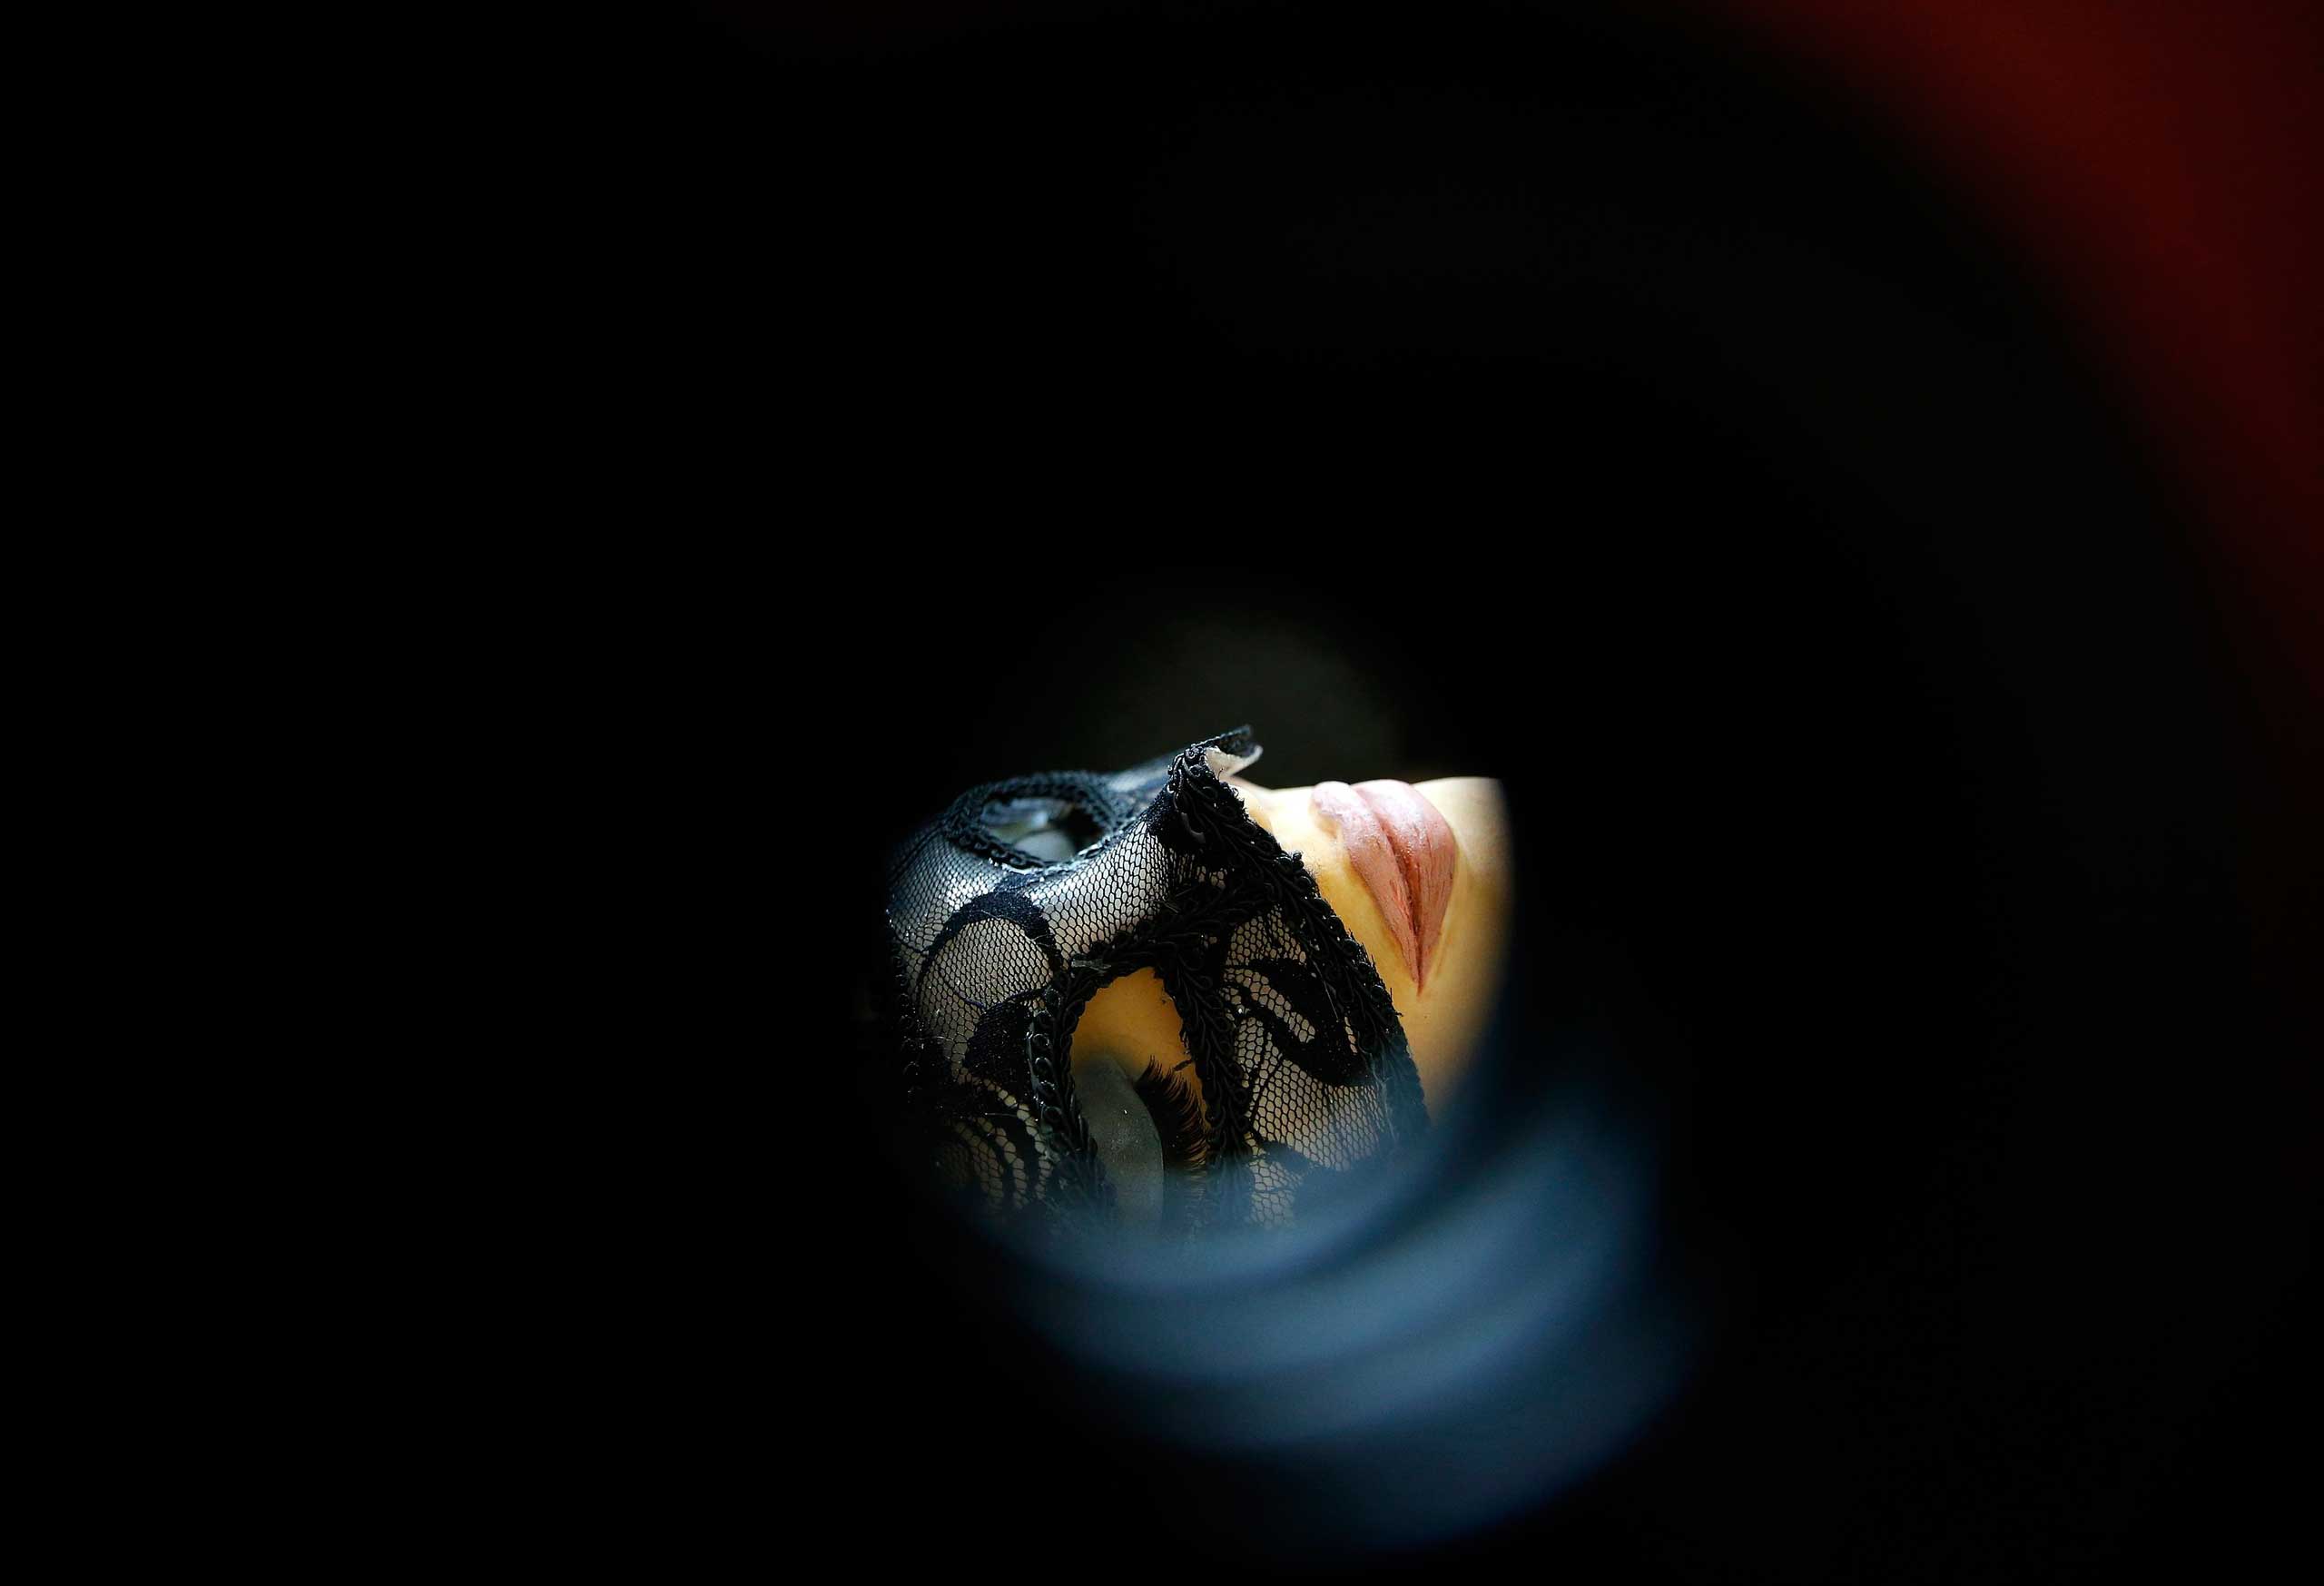 Feb. 6, 2015. A cake in the form of a woman in a mask from the book  Fifty Shades of Grey  is viewed through a peep hole as part of a display entitled  Fifty Shades of Cake , on the opening day of the Cake International show in Manchester, northern England.